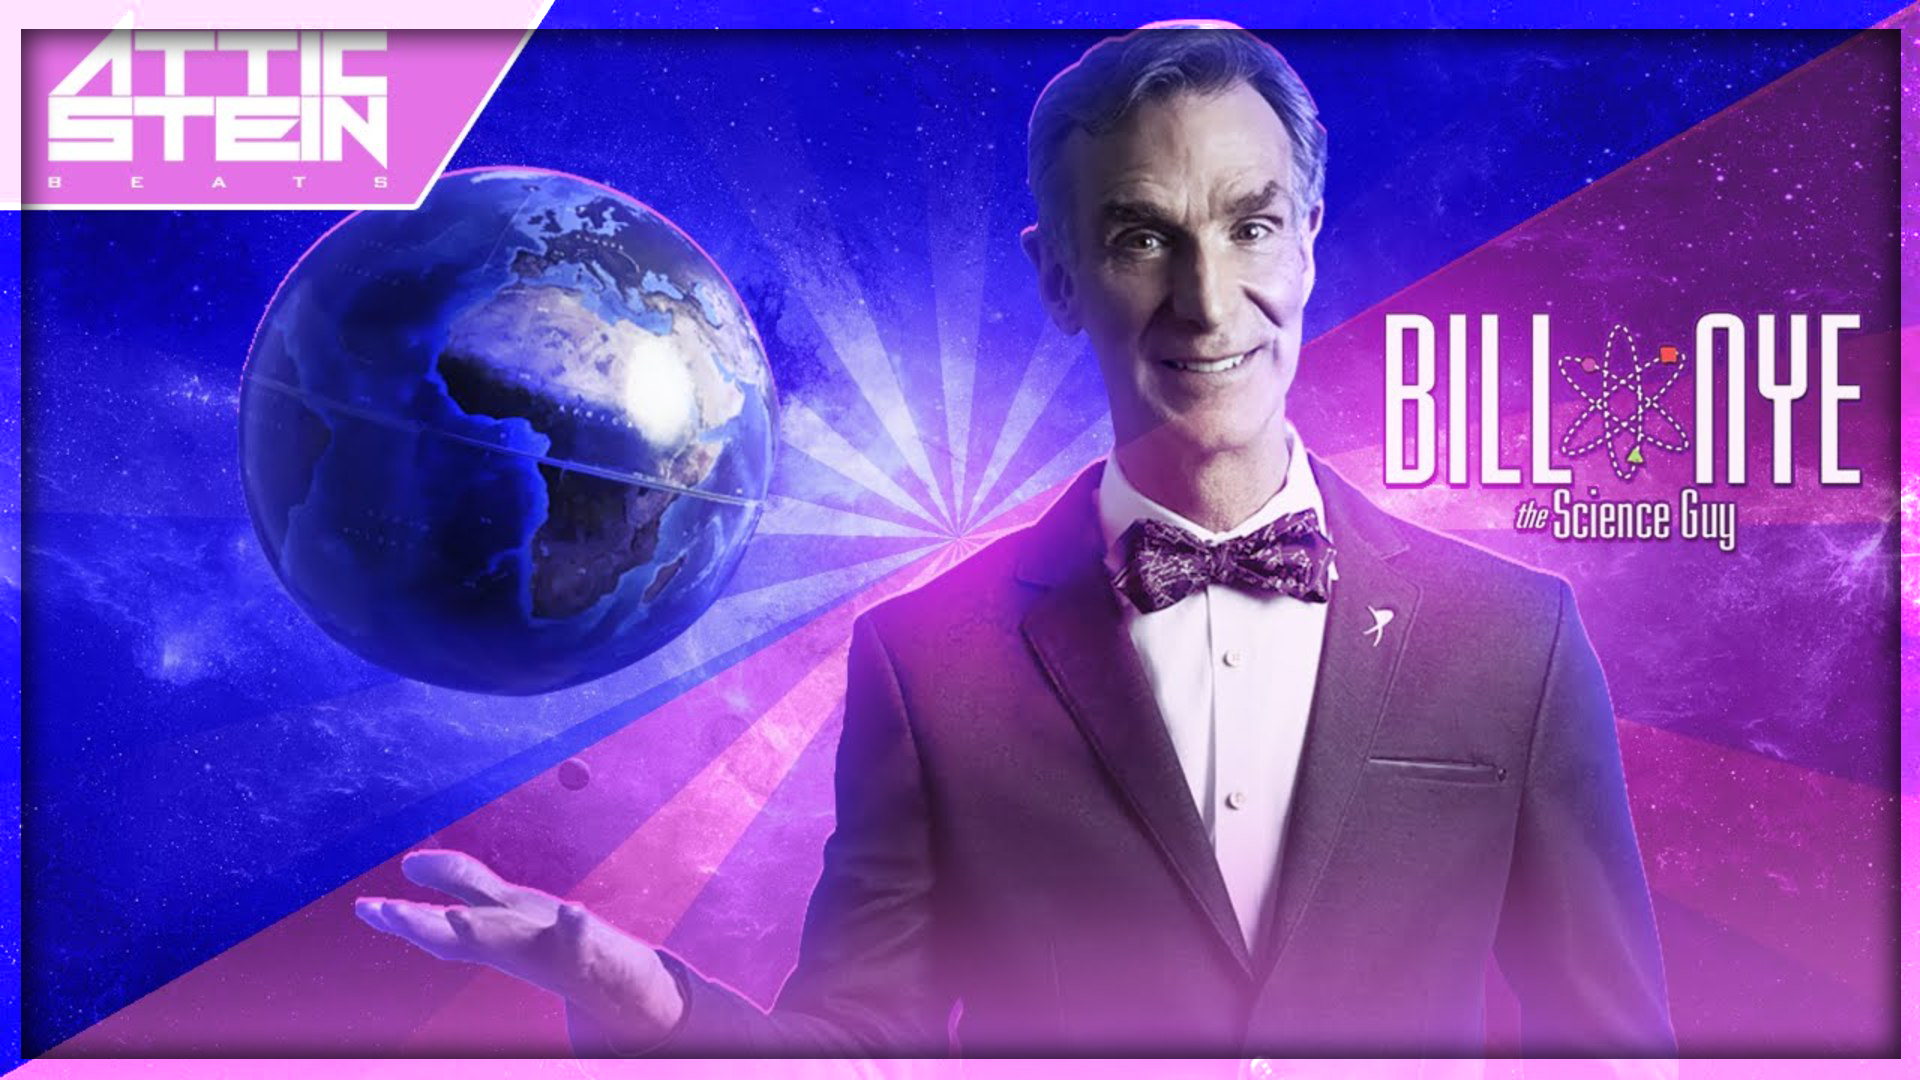 Bill Nye the Science Guy [1920x1080]. Science guy, Bill nye, Theme song